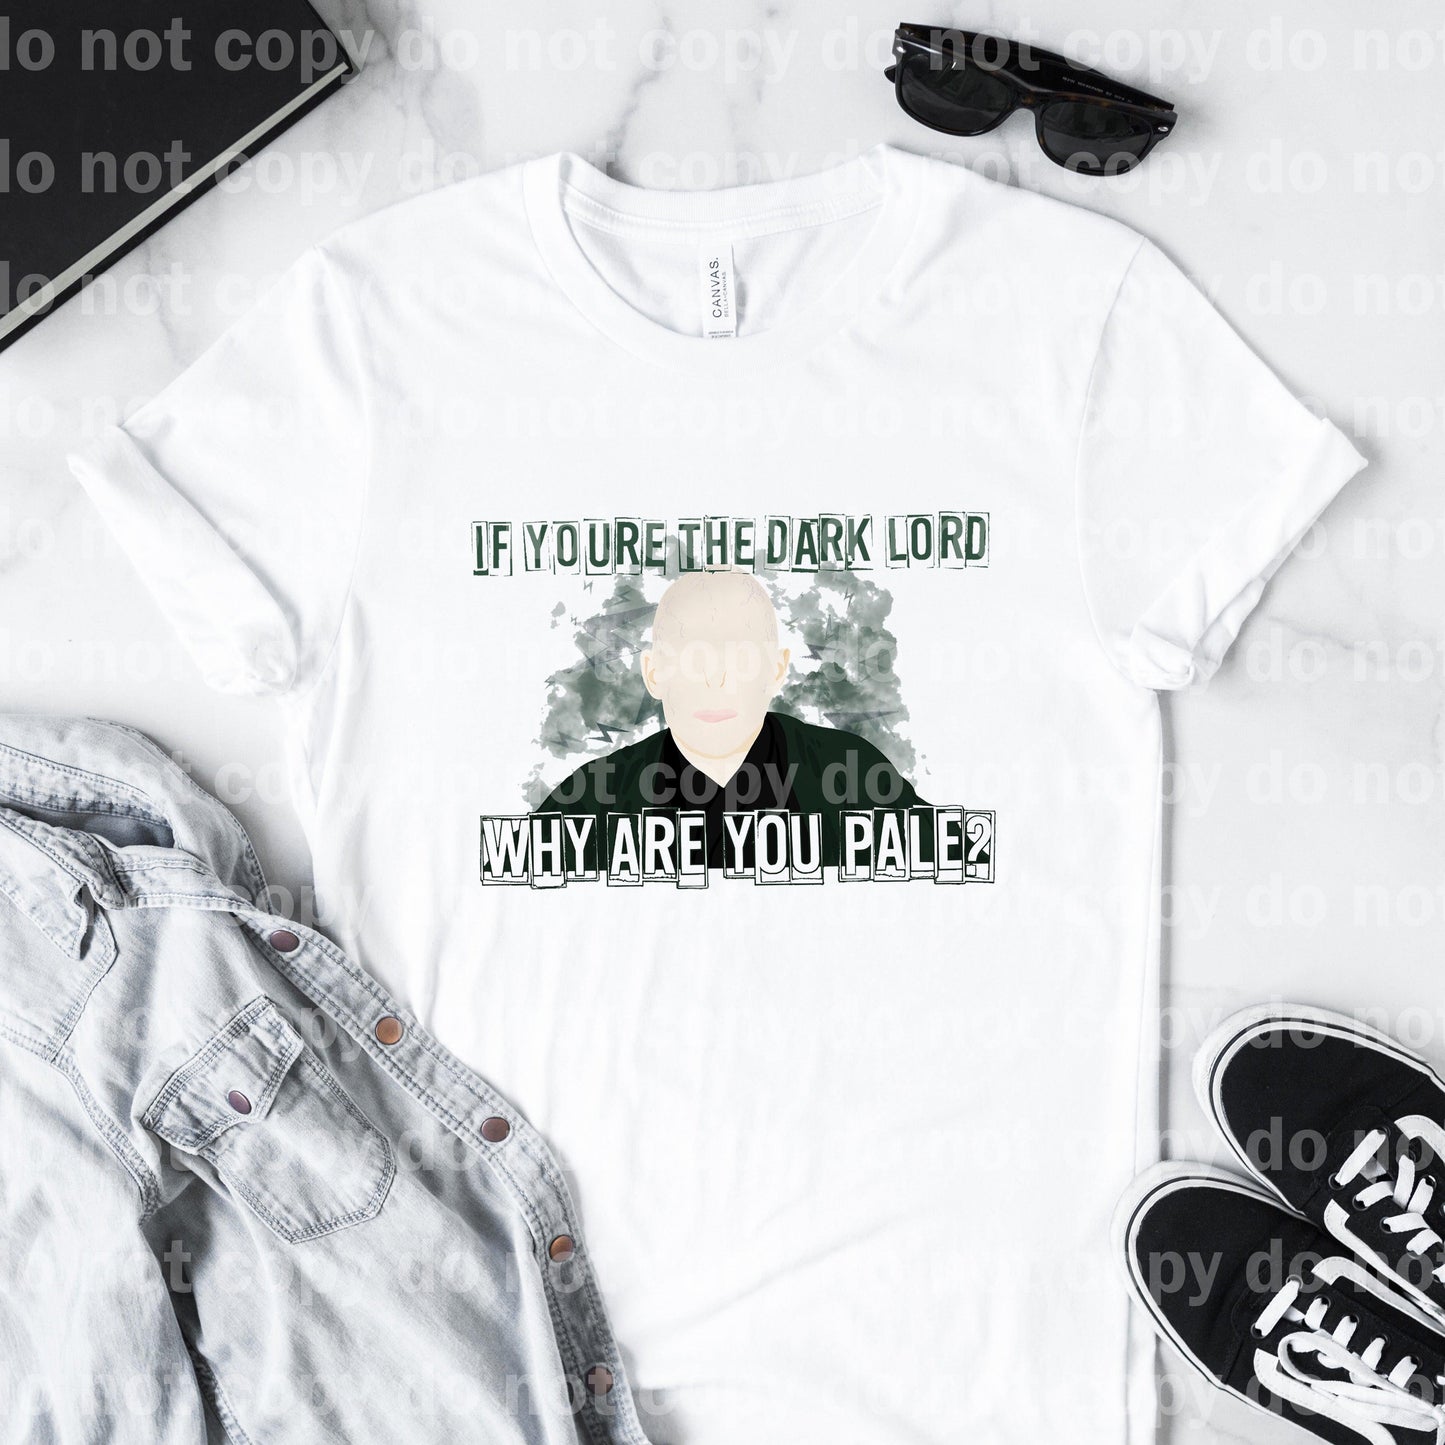 If you're the Dark Lord, why are you pale? Dream Print or Sublimation Print